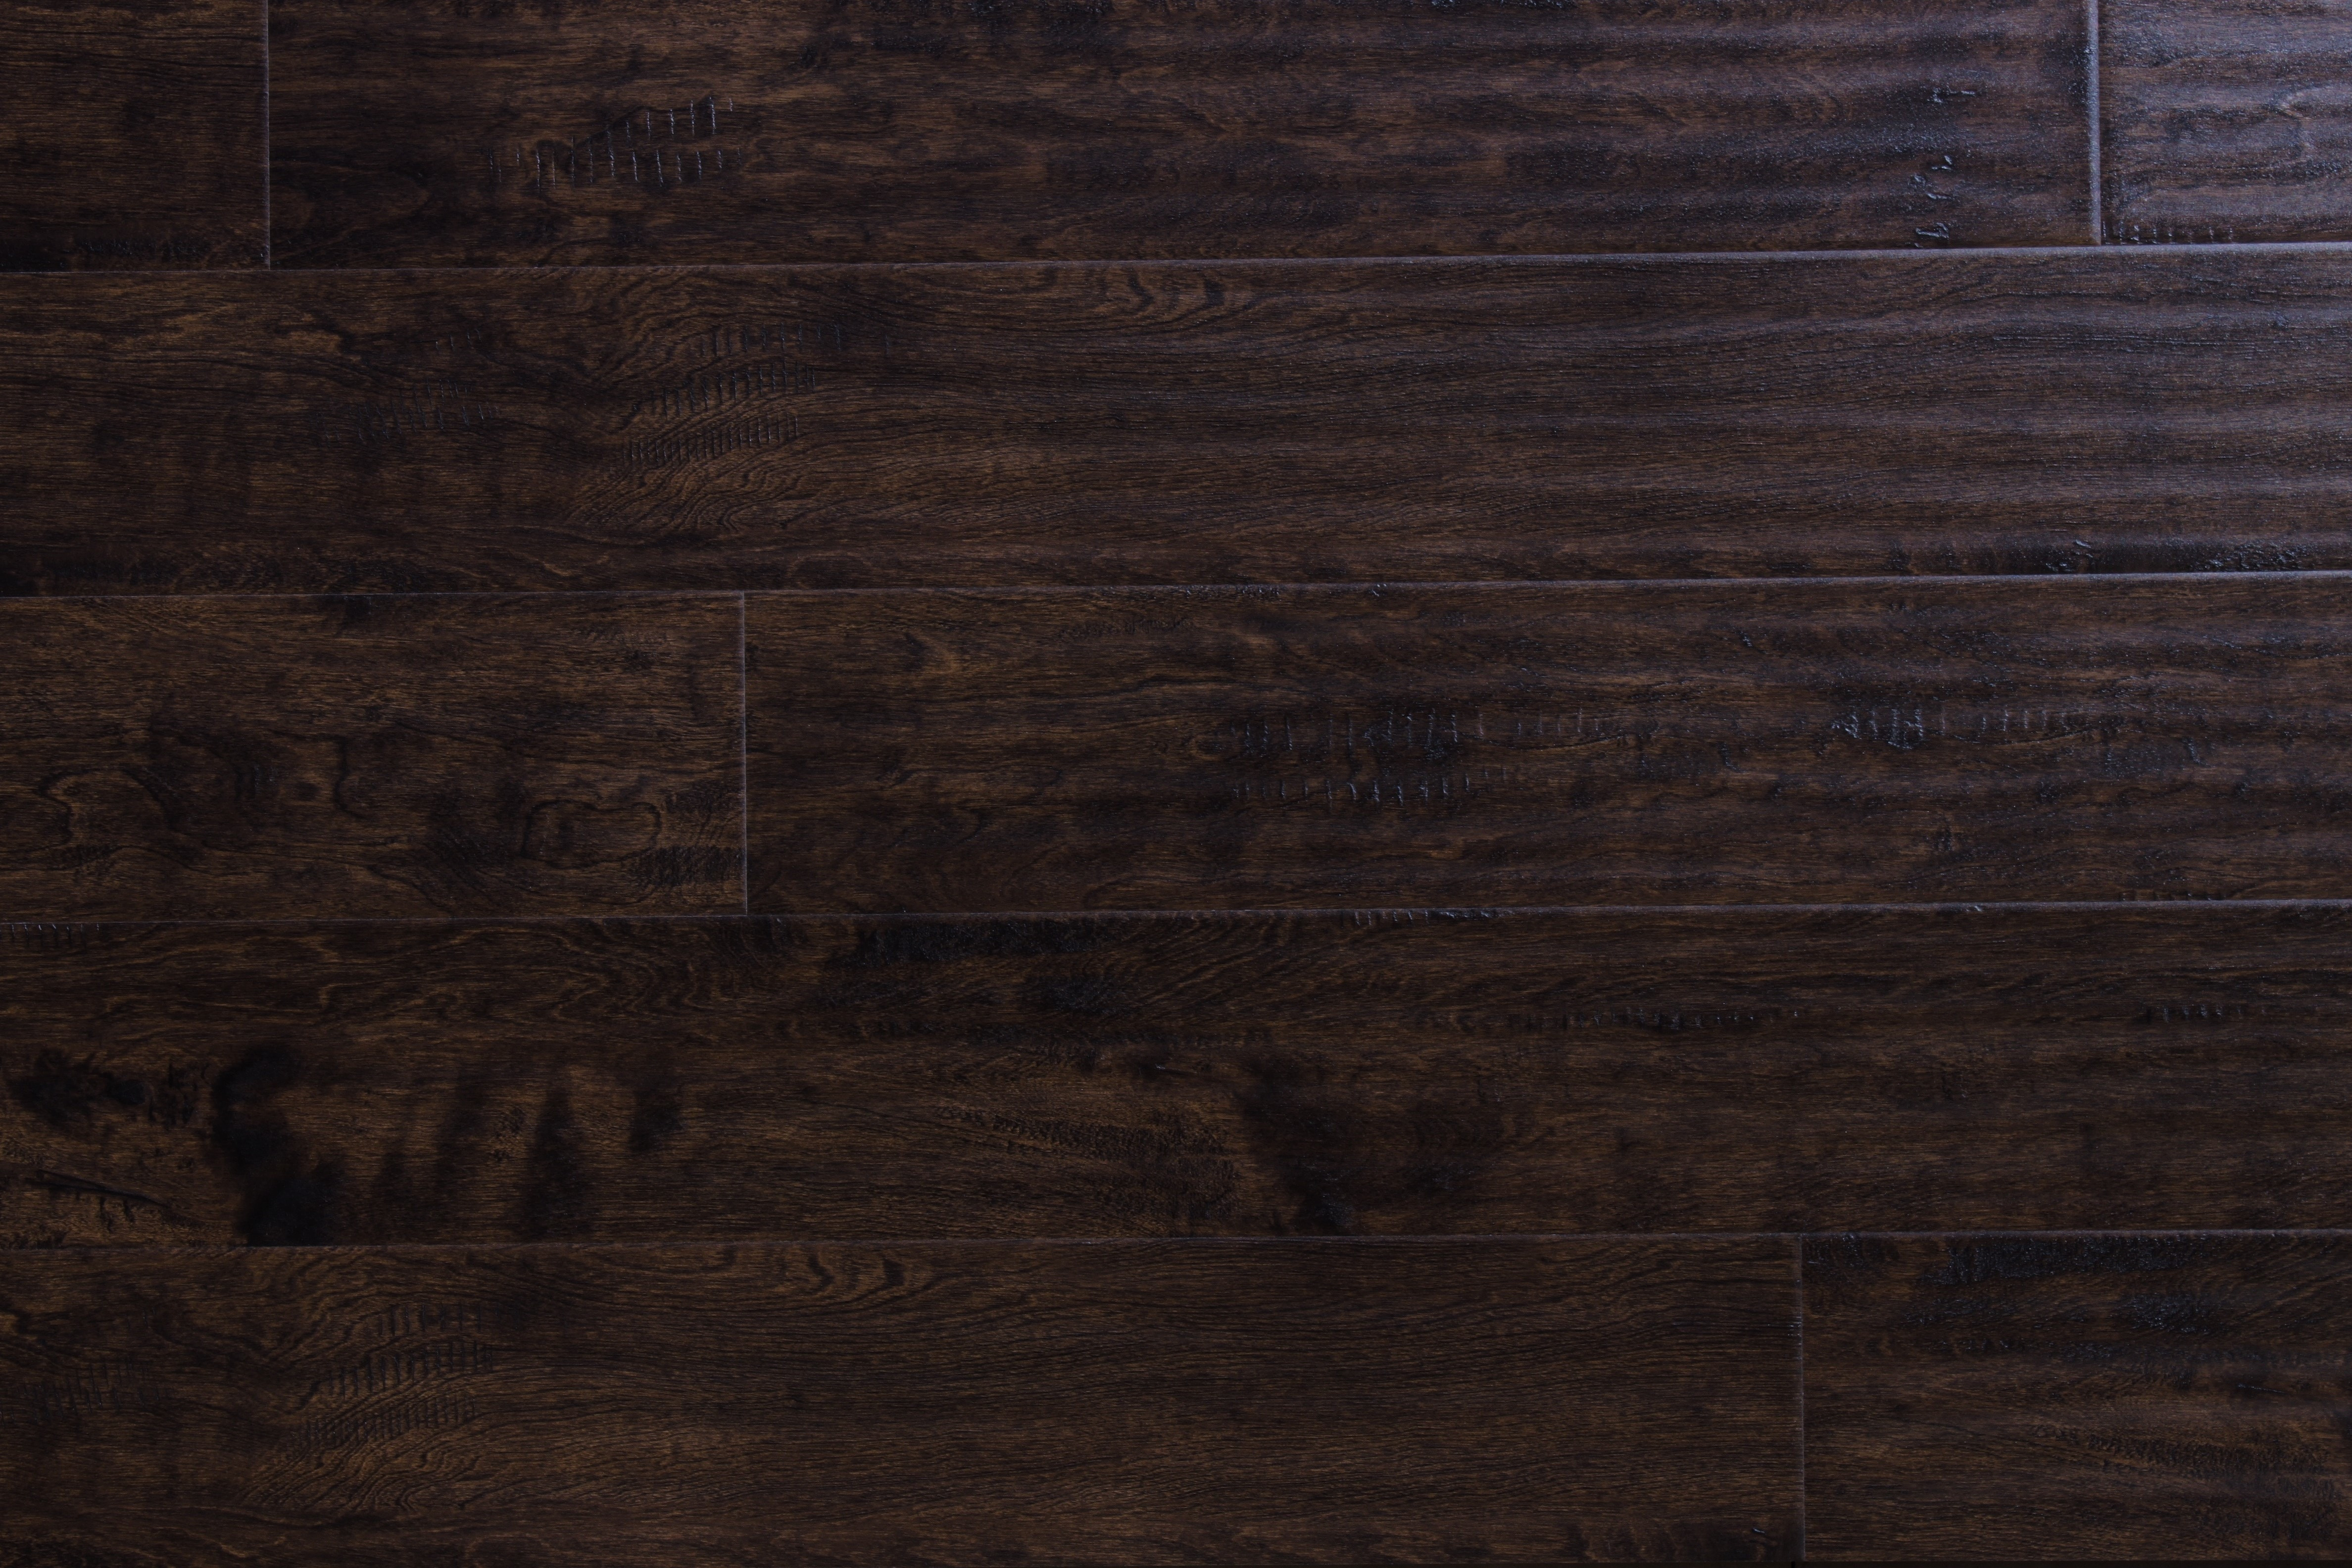 30 Famous Distressed Hardwood Flooring Prices 2024 free download distressed hardwood flooring prices of wood flooring free samples available at builddirecta within tailor multi gb 5874277bb8d3c